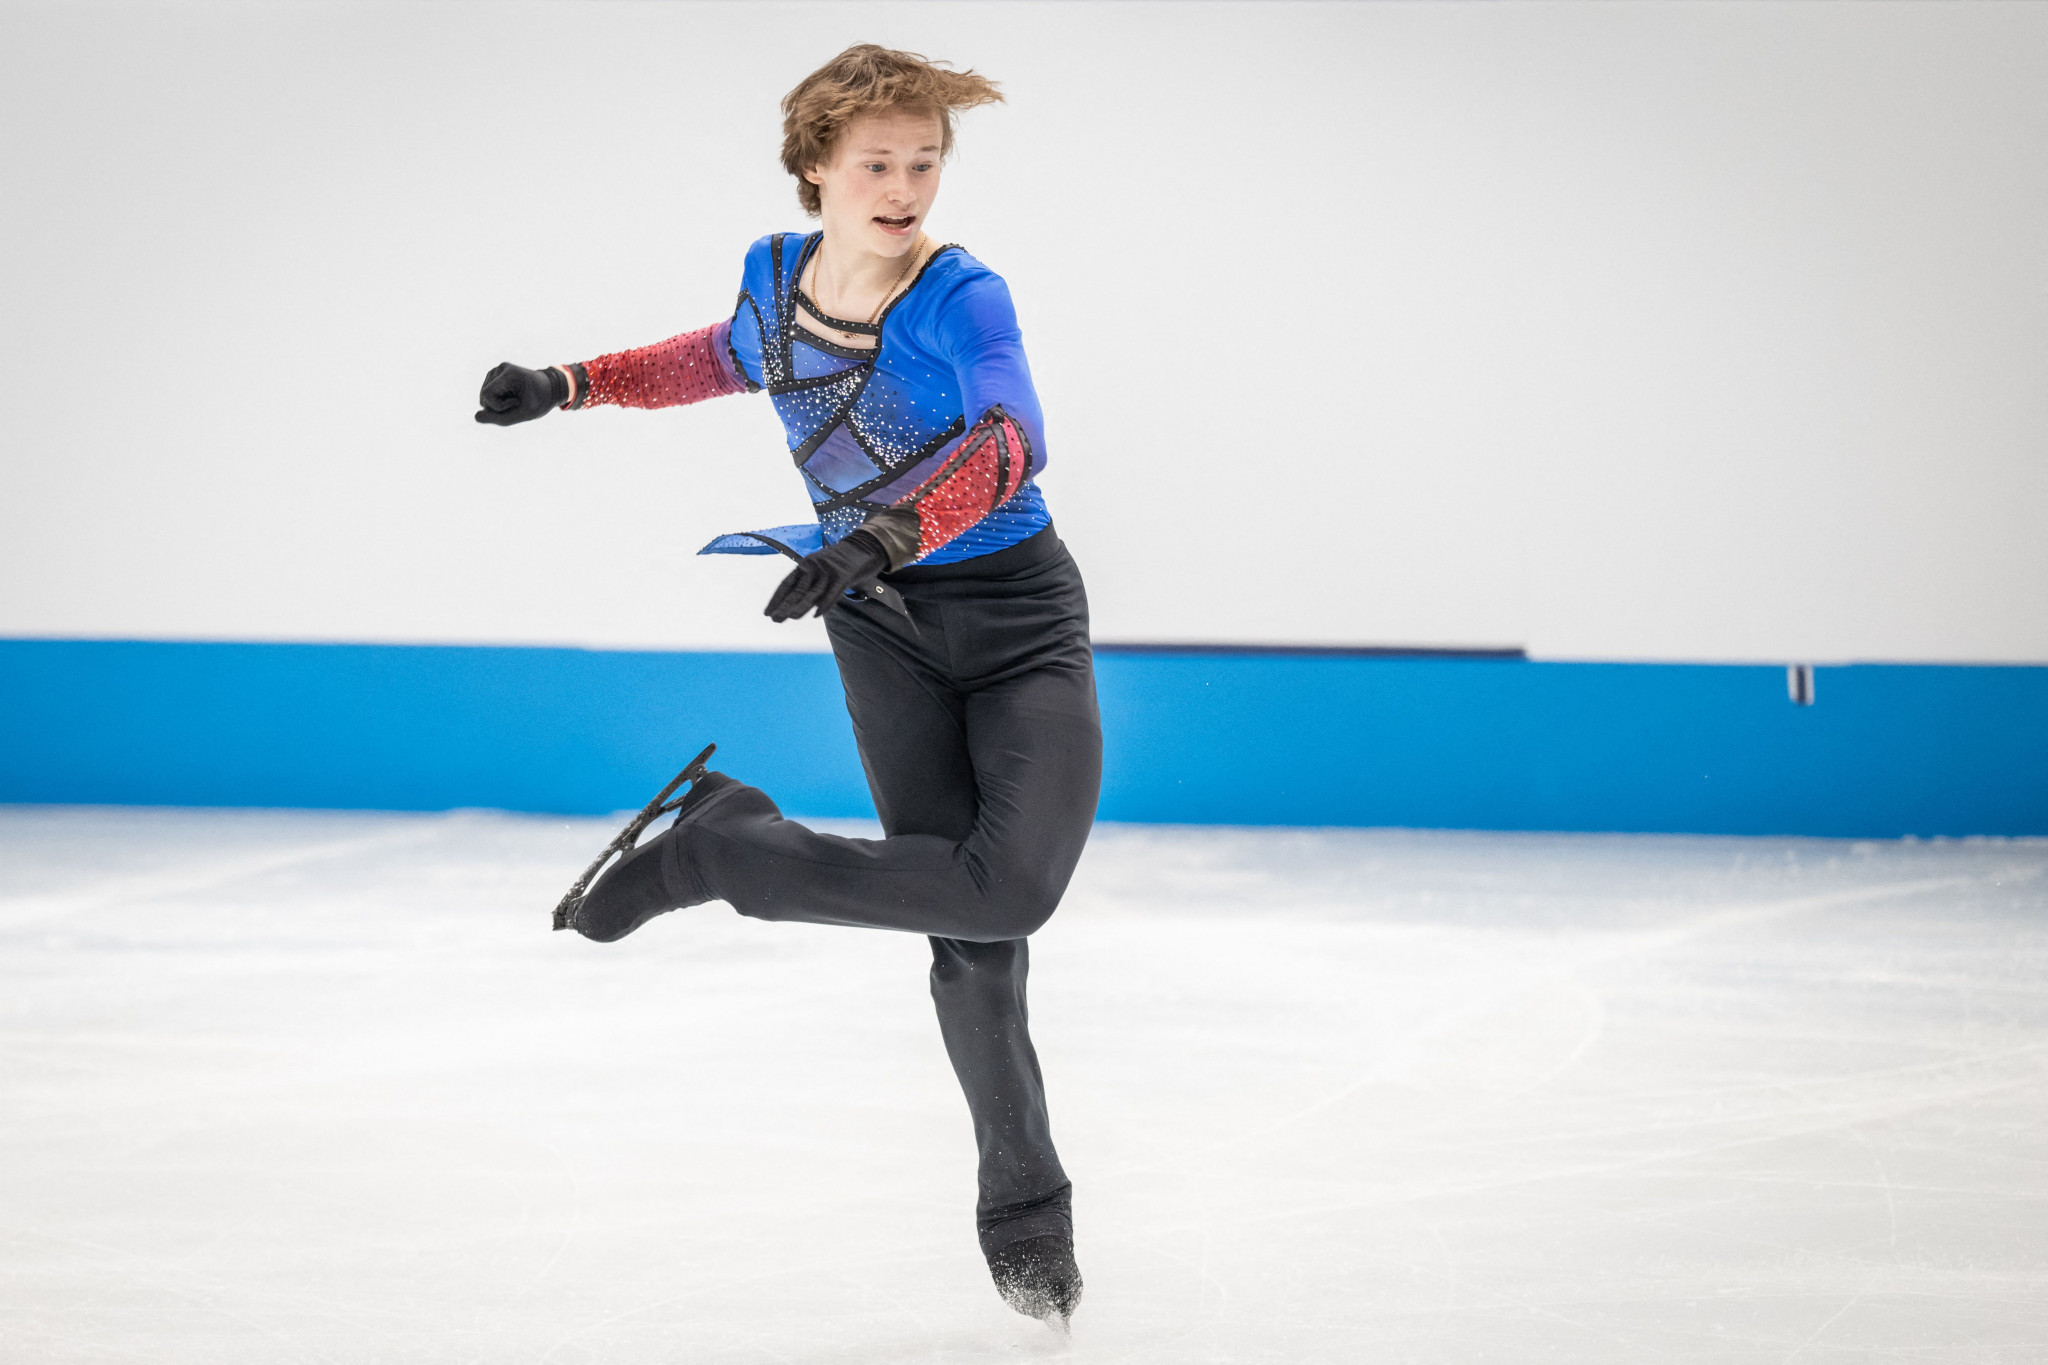 Ilia Malinin of the United States has had a stellar year, becoming the first and only skater to have landed the quad axel in competition ©Getty Images